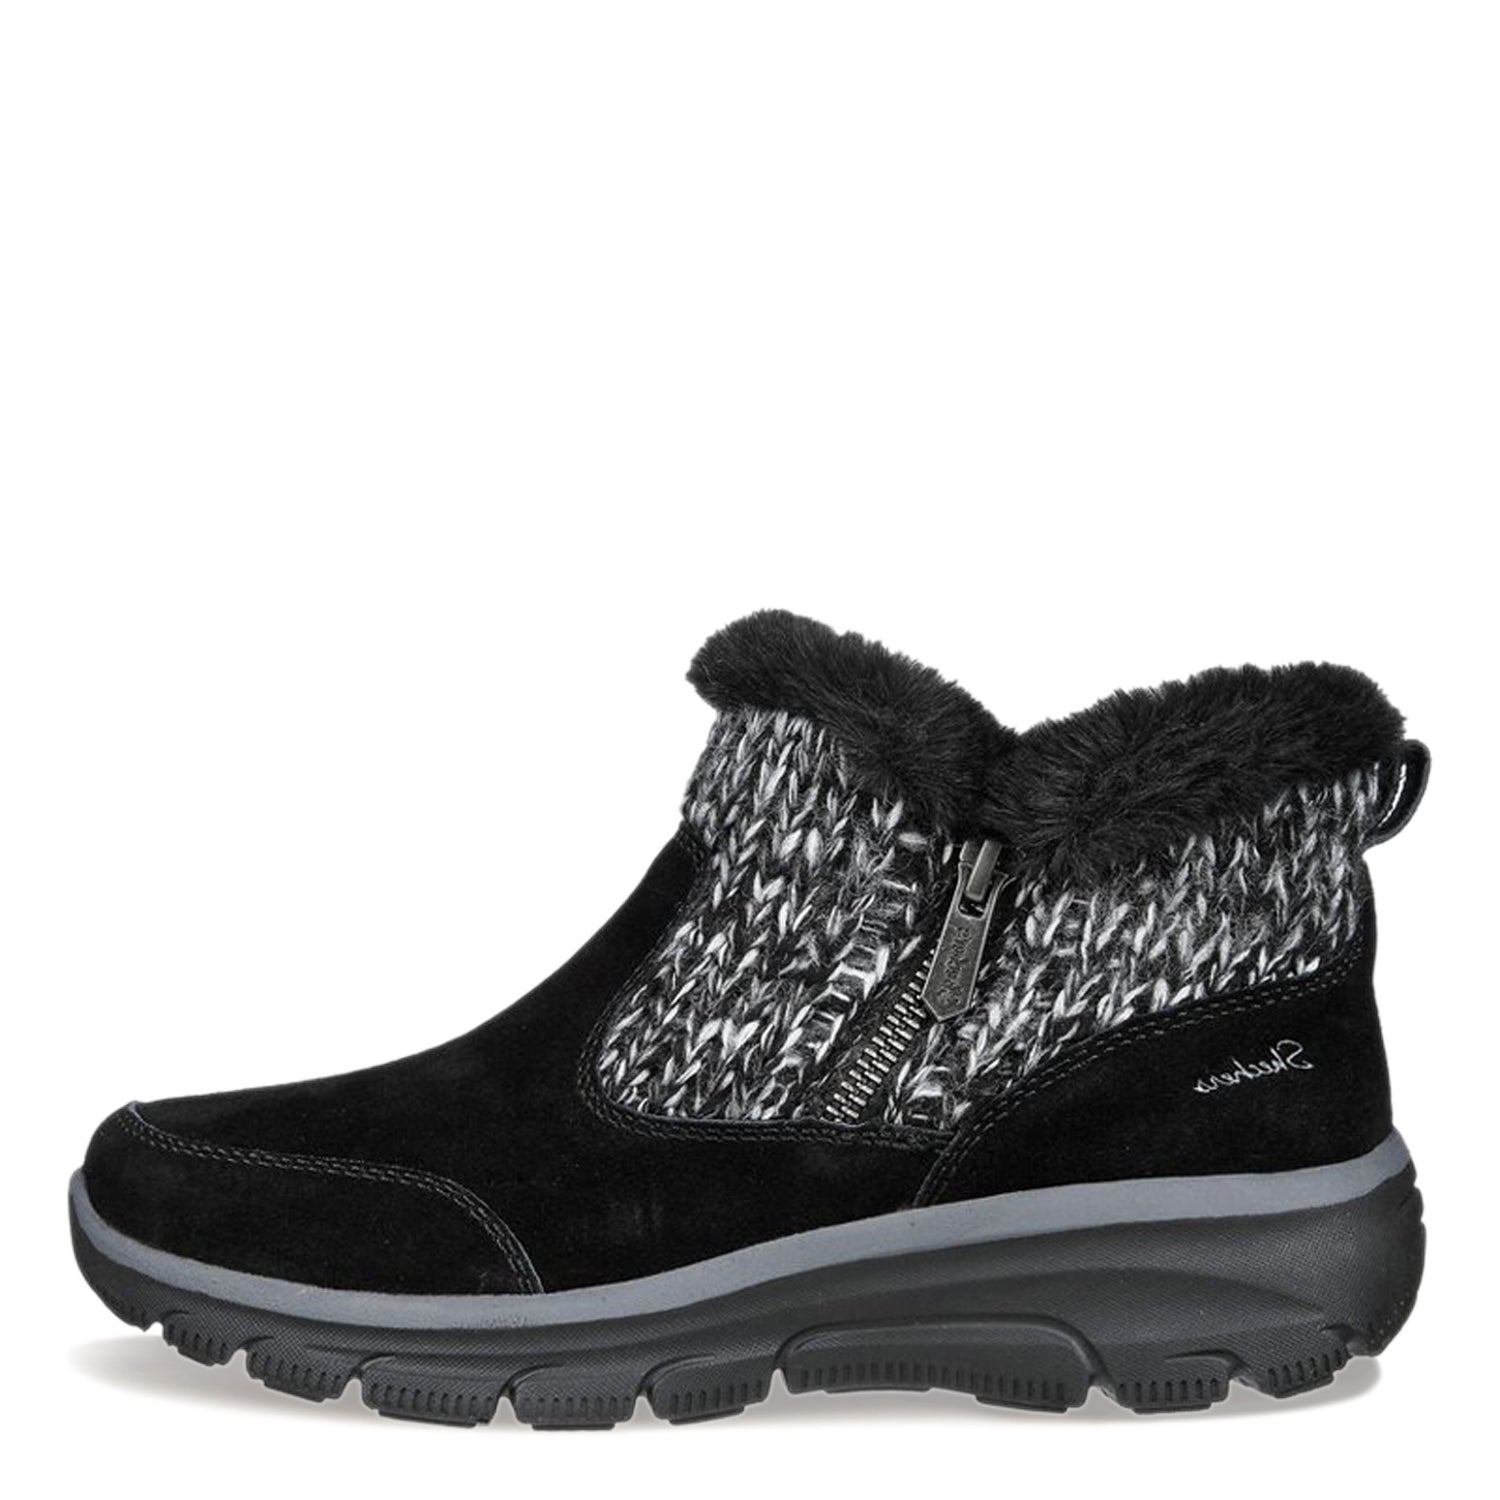 Peltz Shoes  Women's Skechers Relaxed Fit: Easy Going - Warmhearted Boot Black 167329-BLK